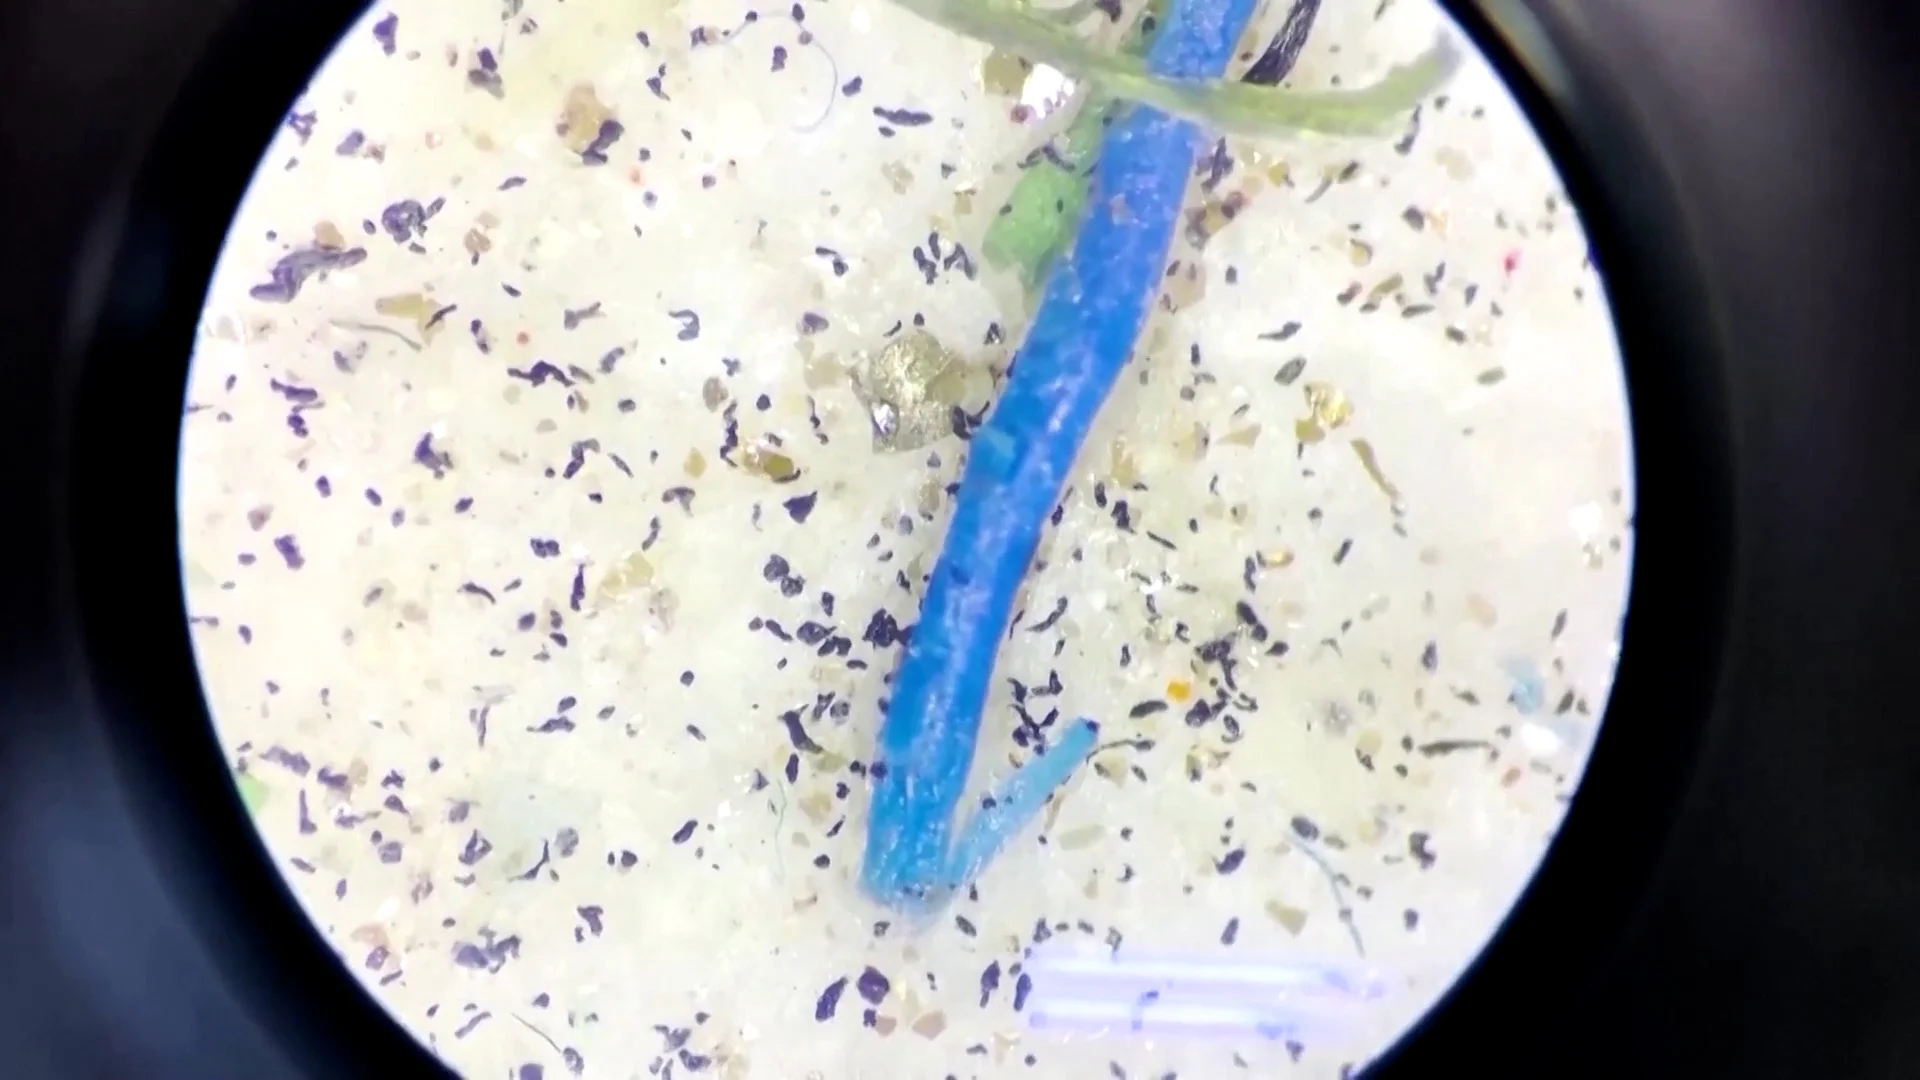 Microplastics found in human blood for the first time